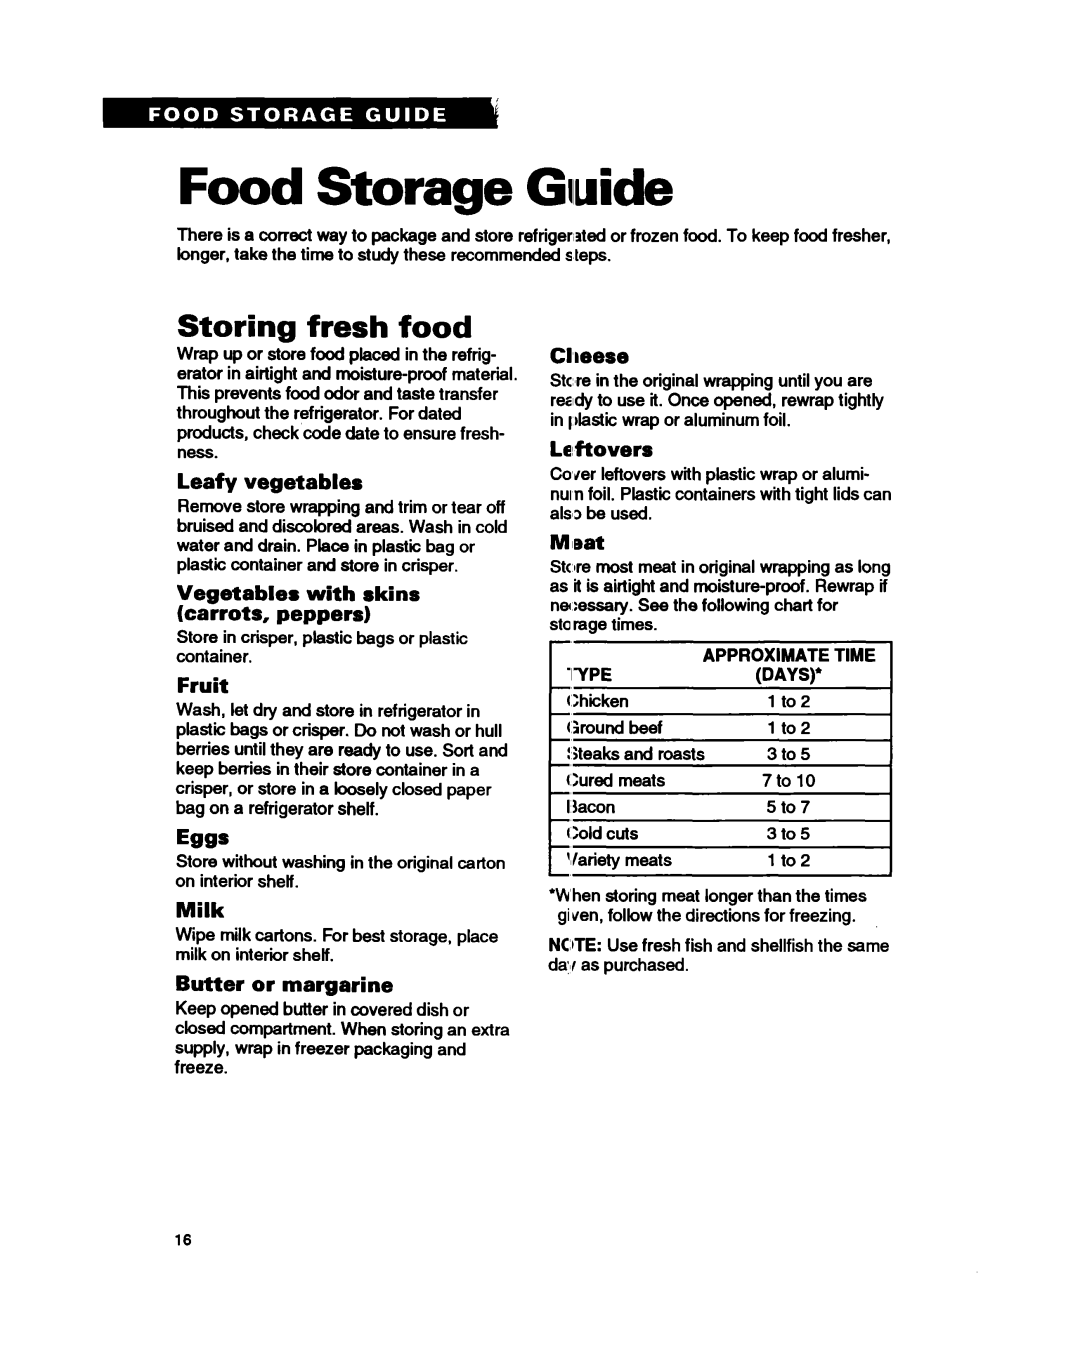 Whirlpool RTl4GD Food Storage Guide, Storing fresh food, Leafy vegetables, Vegetables with skins carrots, peppers, Fruit 